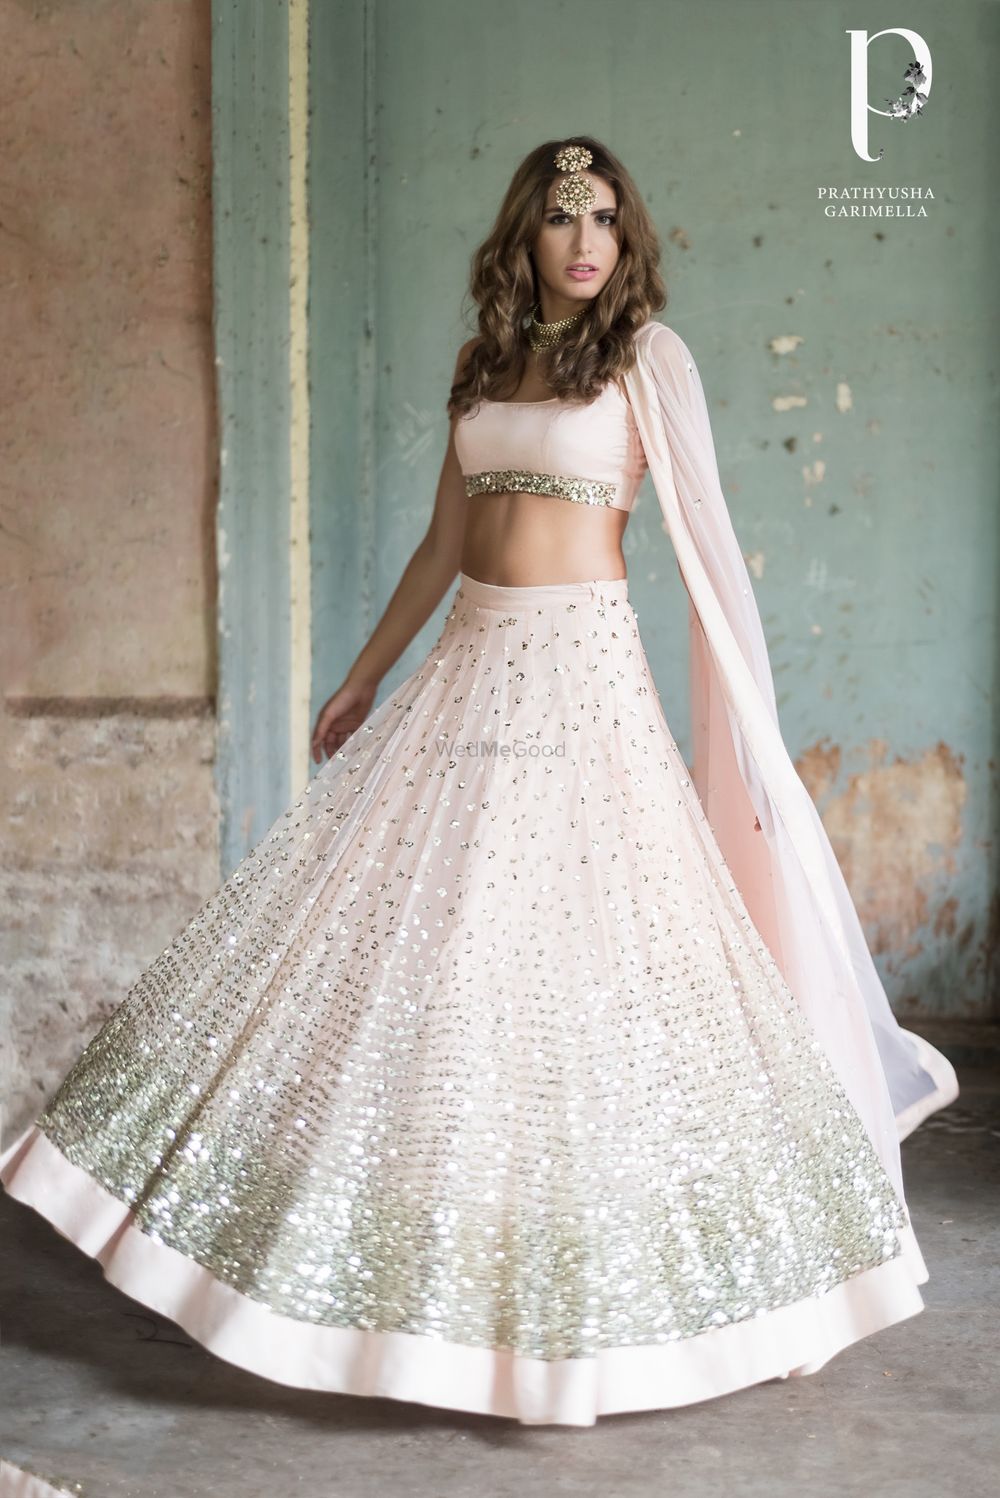 Photo of Shimmery pink lehenga for an engagement or sangeet